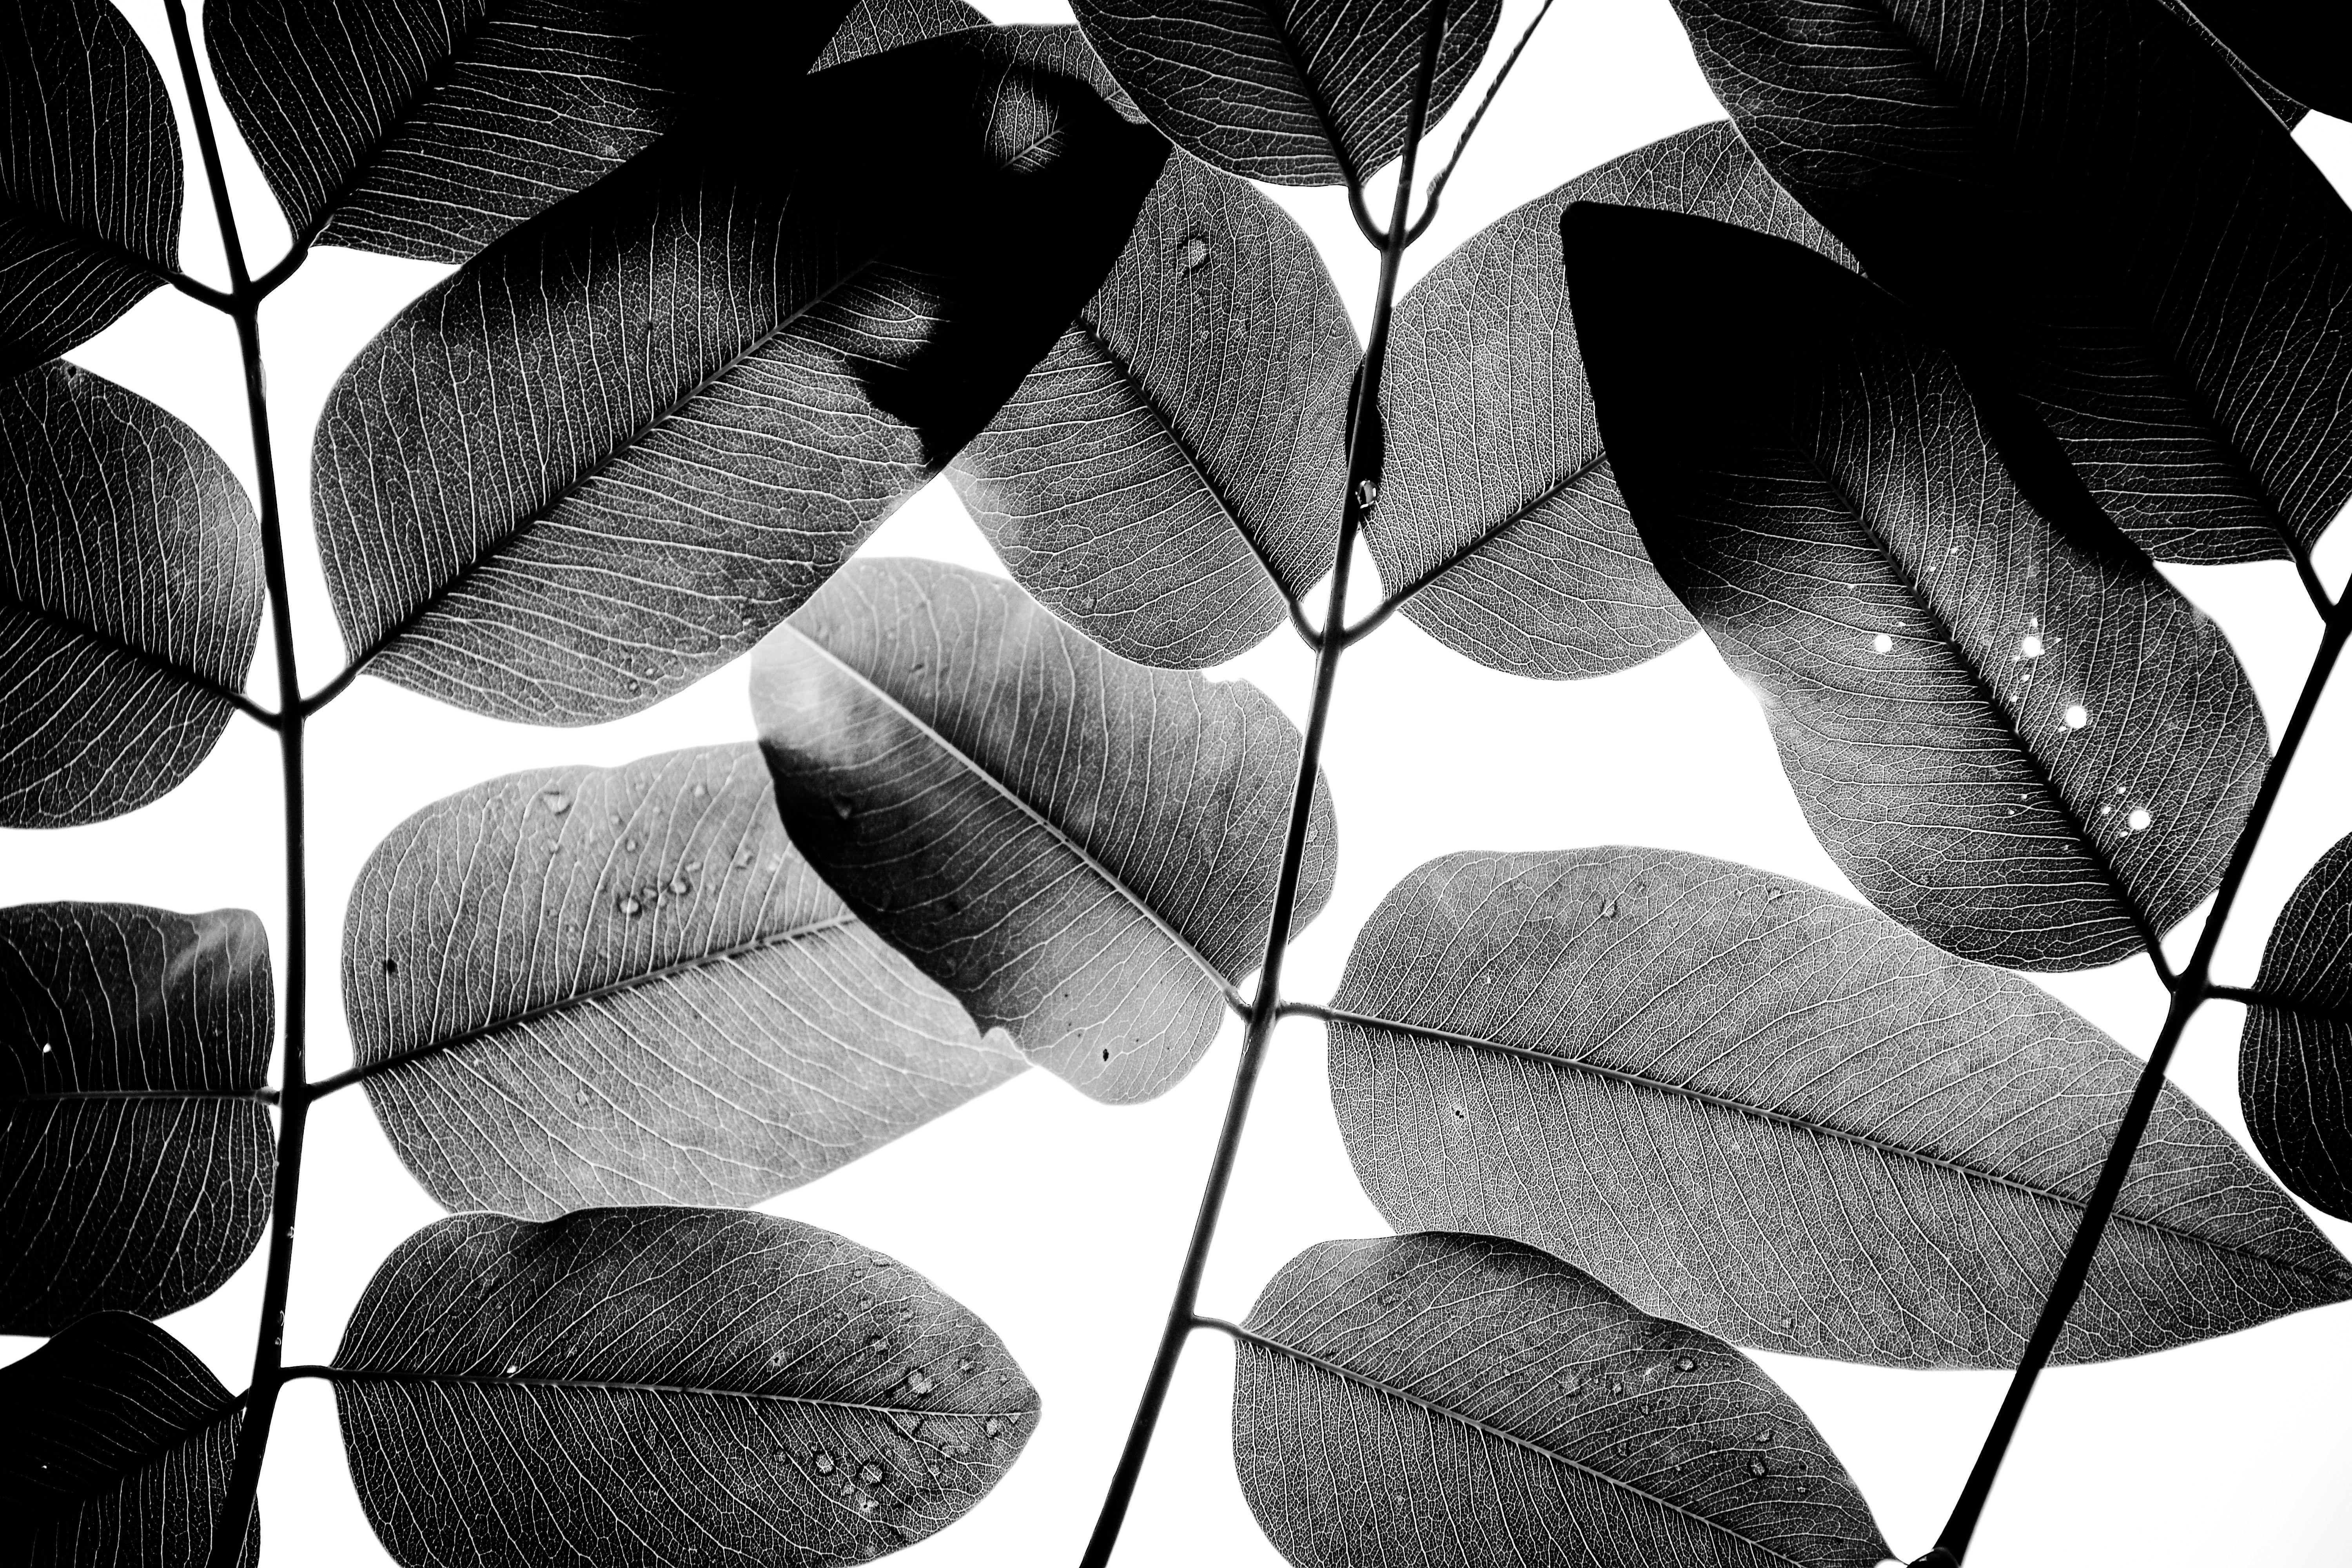 Tal Paz-Fridman Black and White Photograph - Experiments with Leaves II, Photograph, Archival Ink Jet